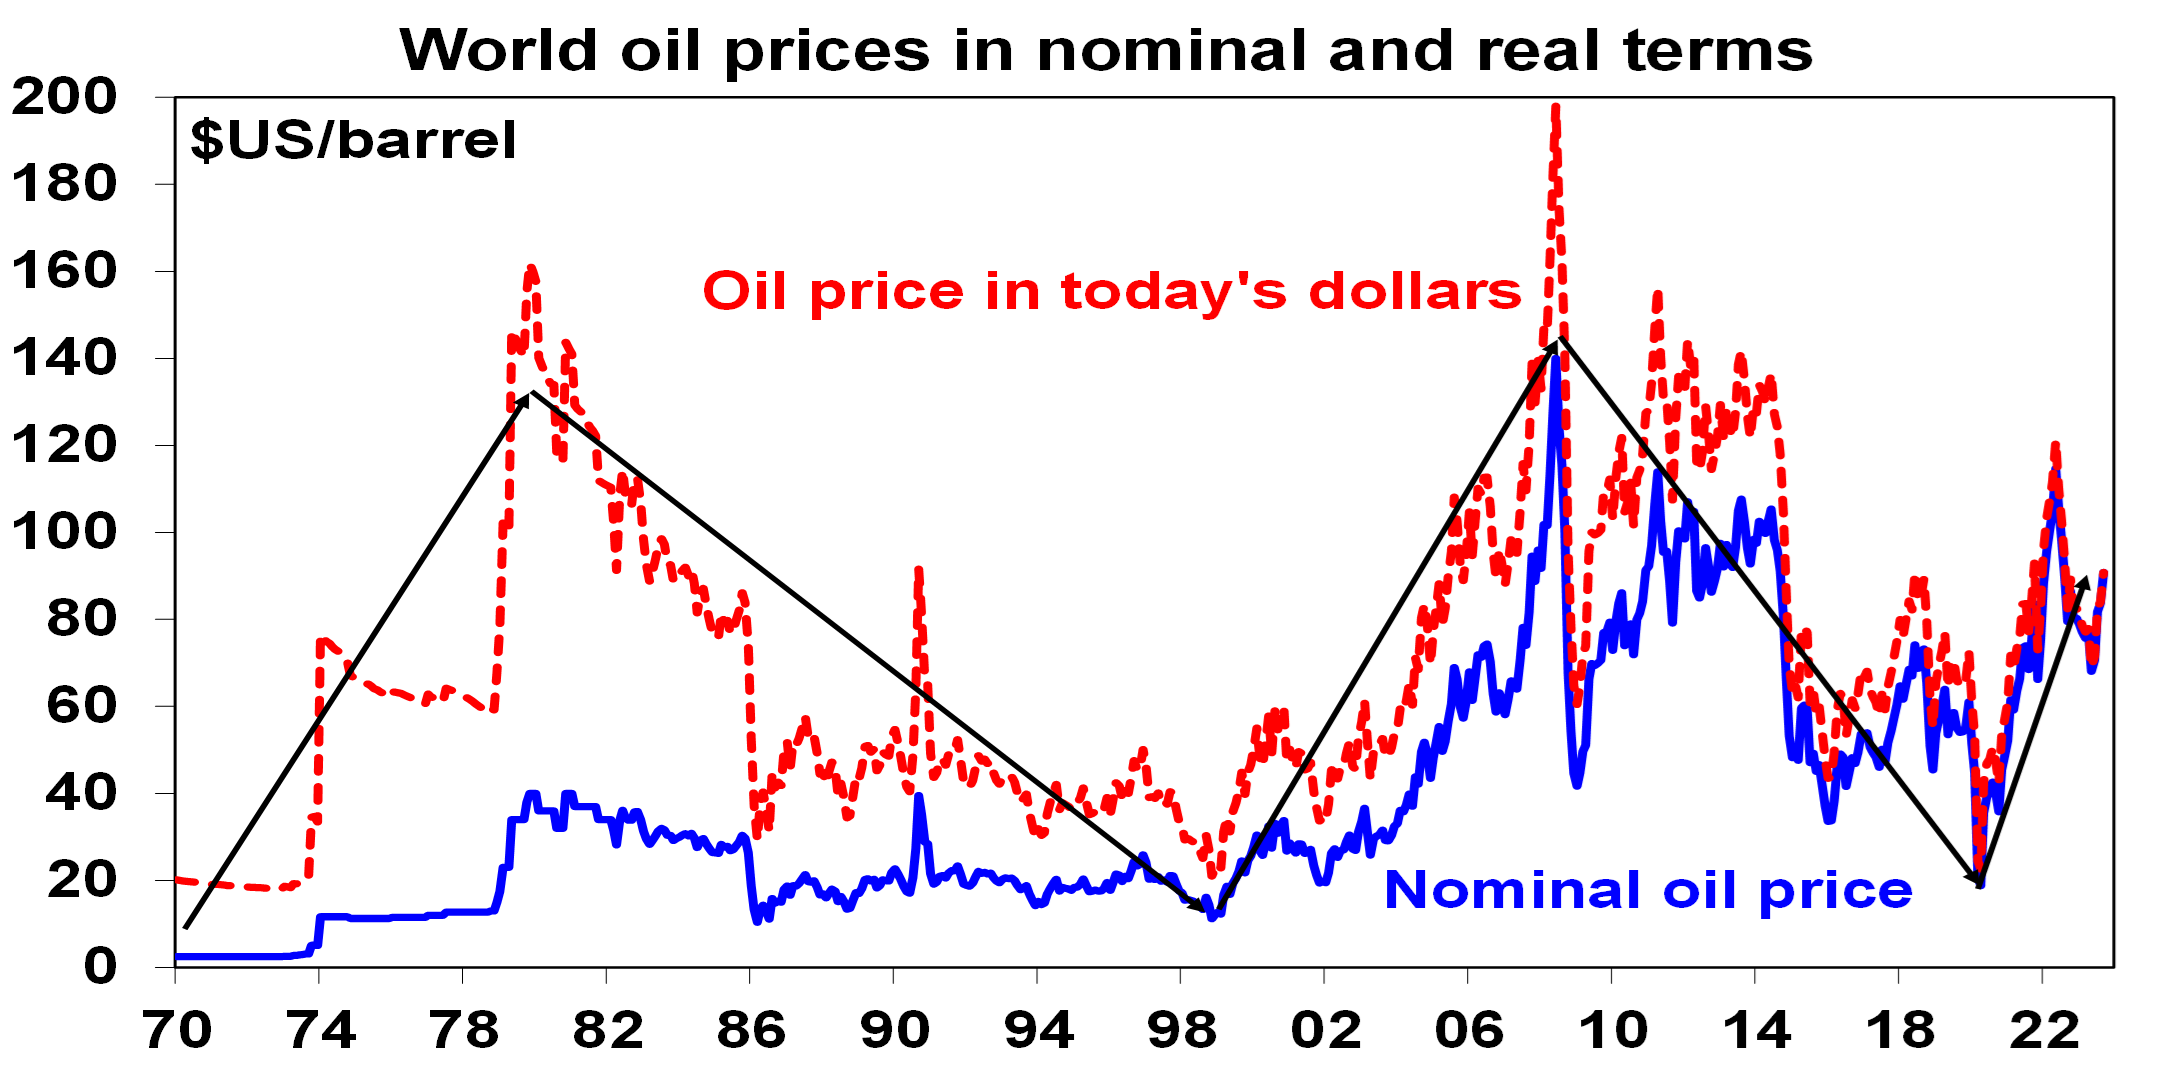 World oil prices in nominal and real terms